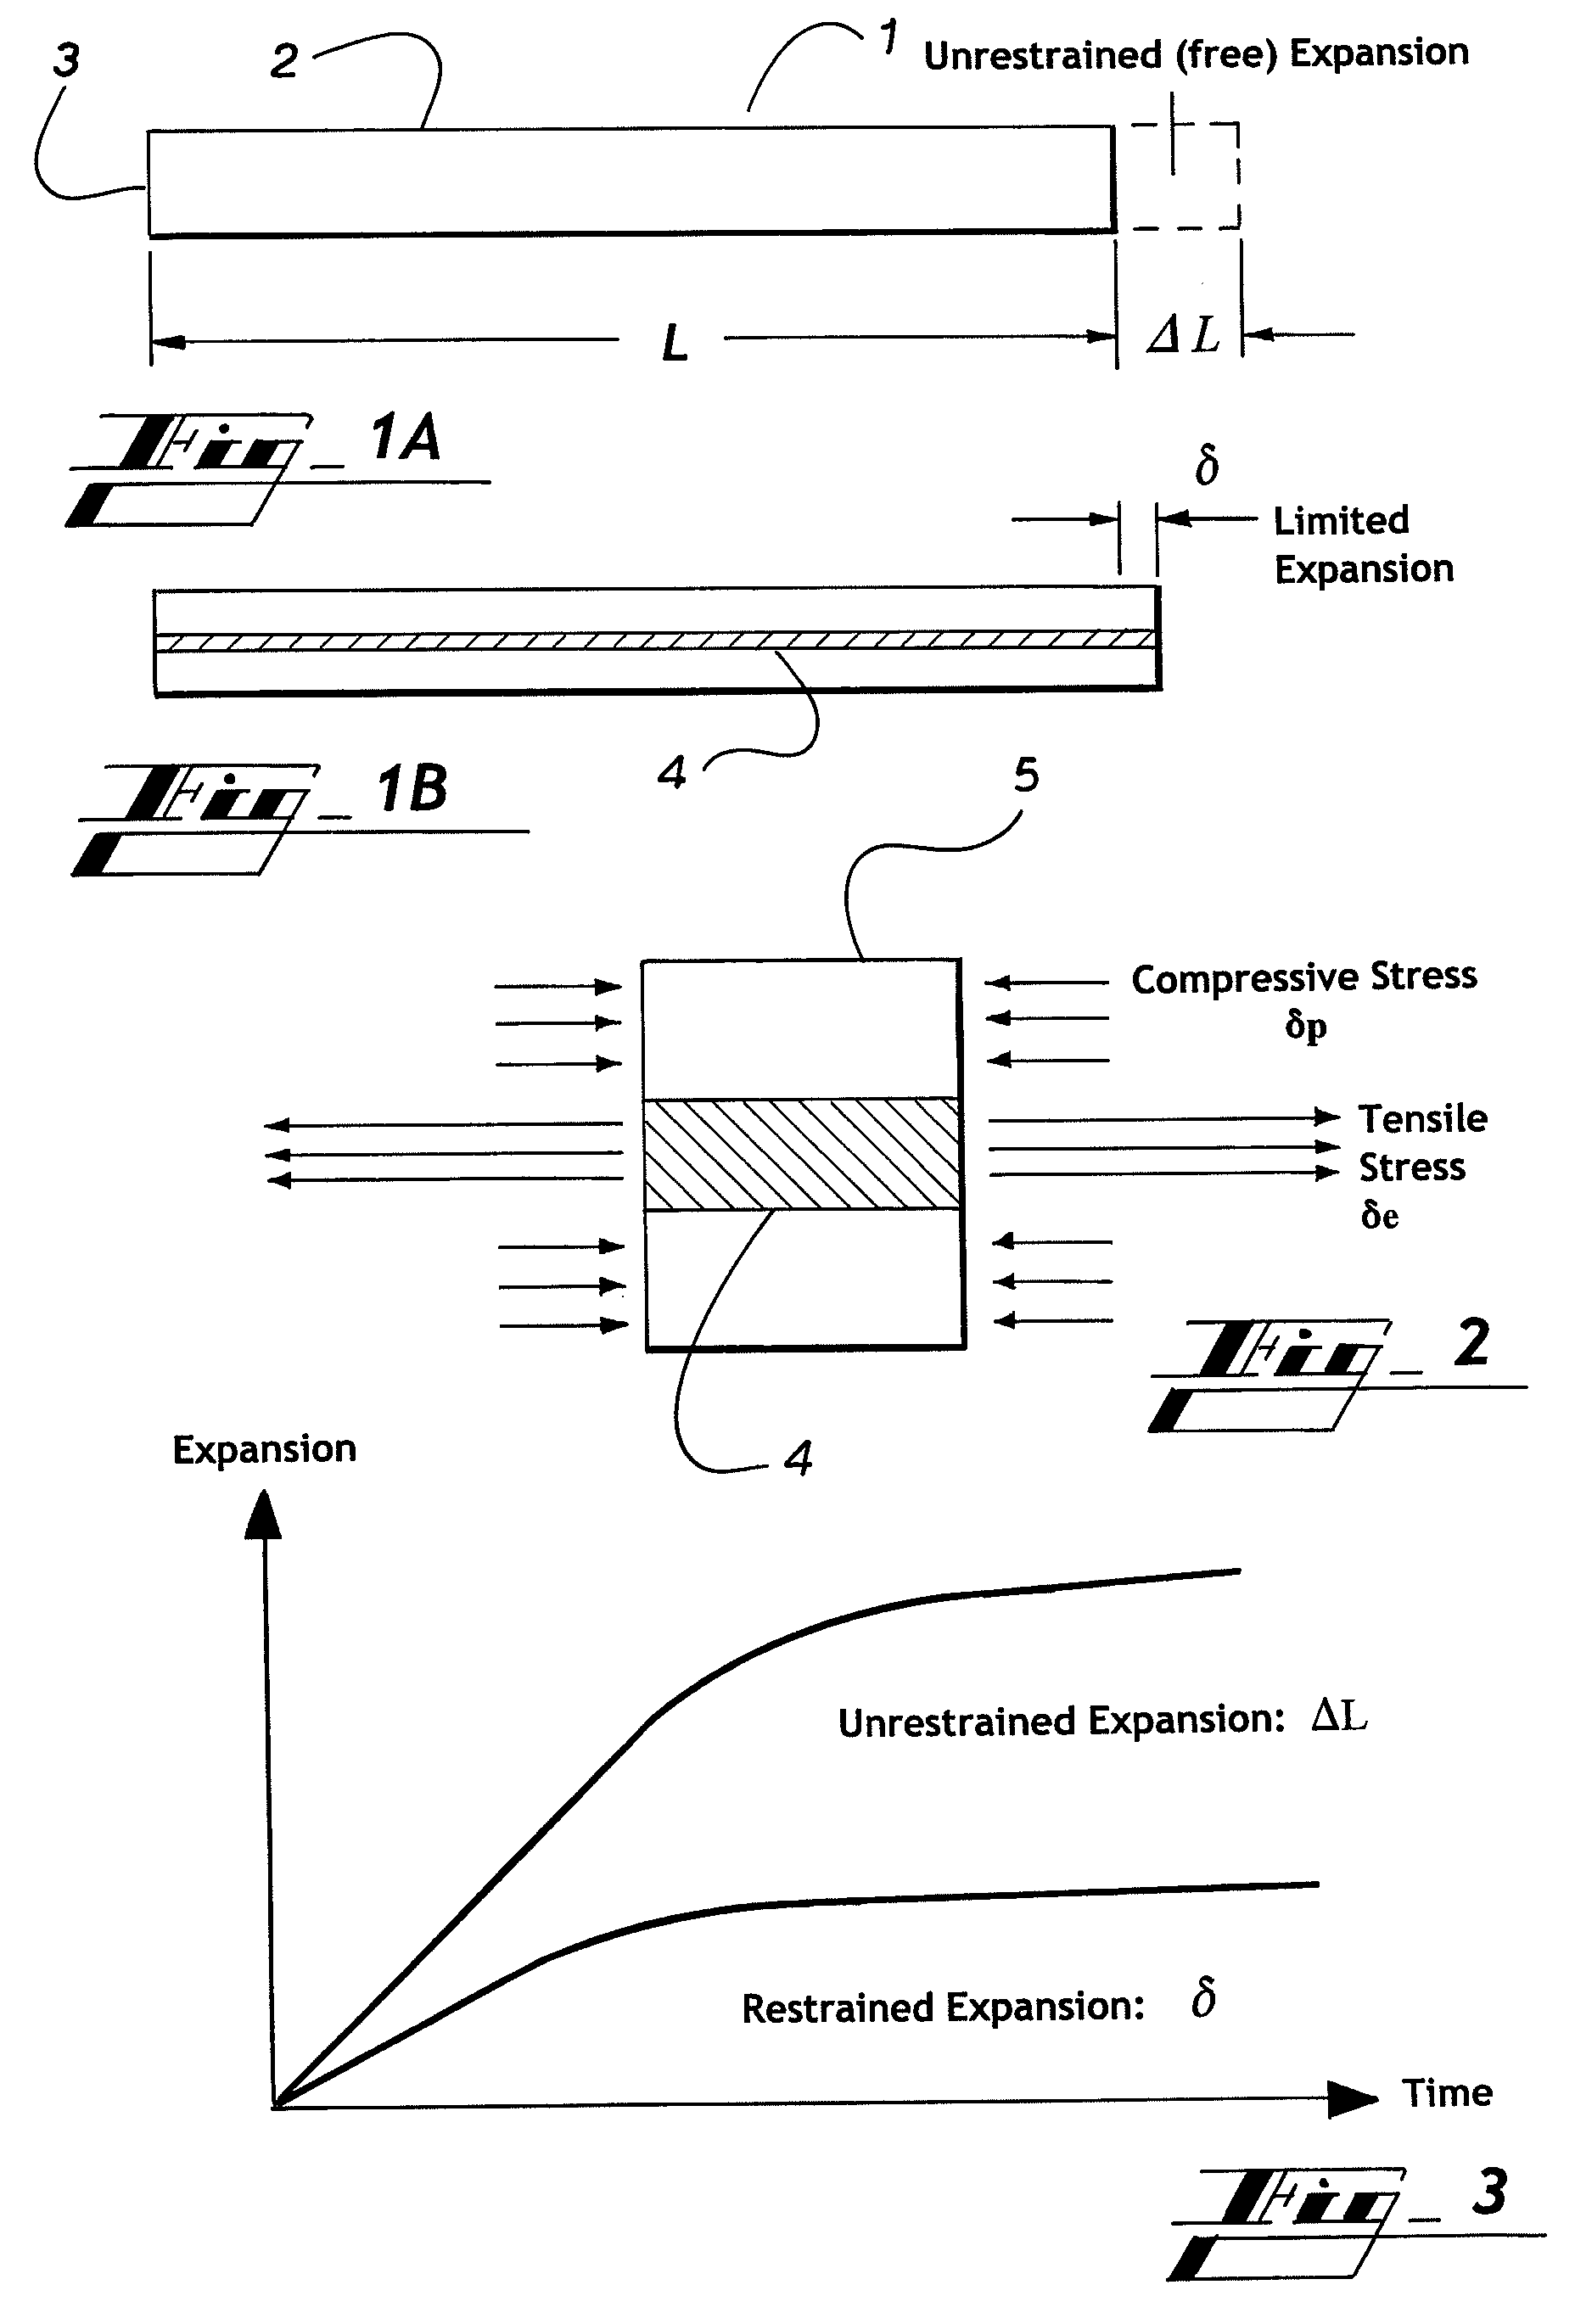 Reinforced profile containing elements to limit expansion